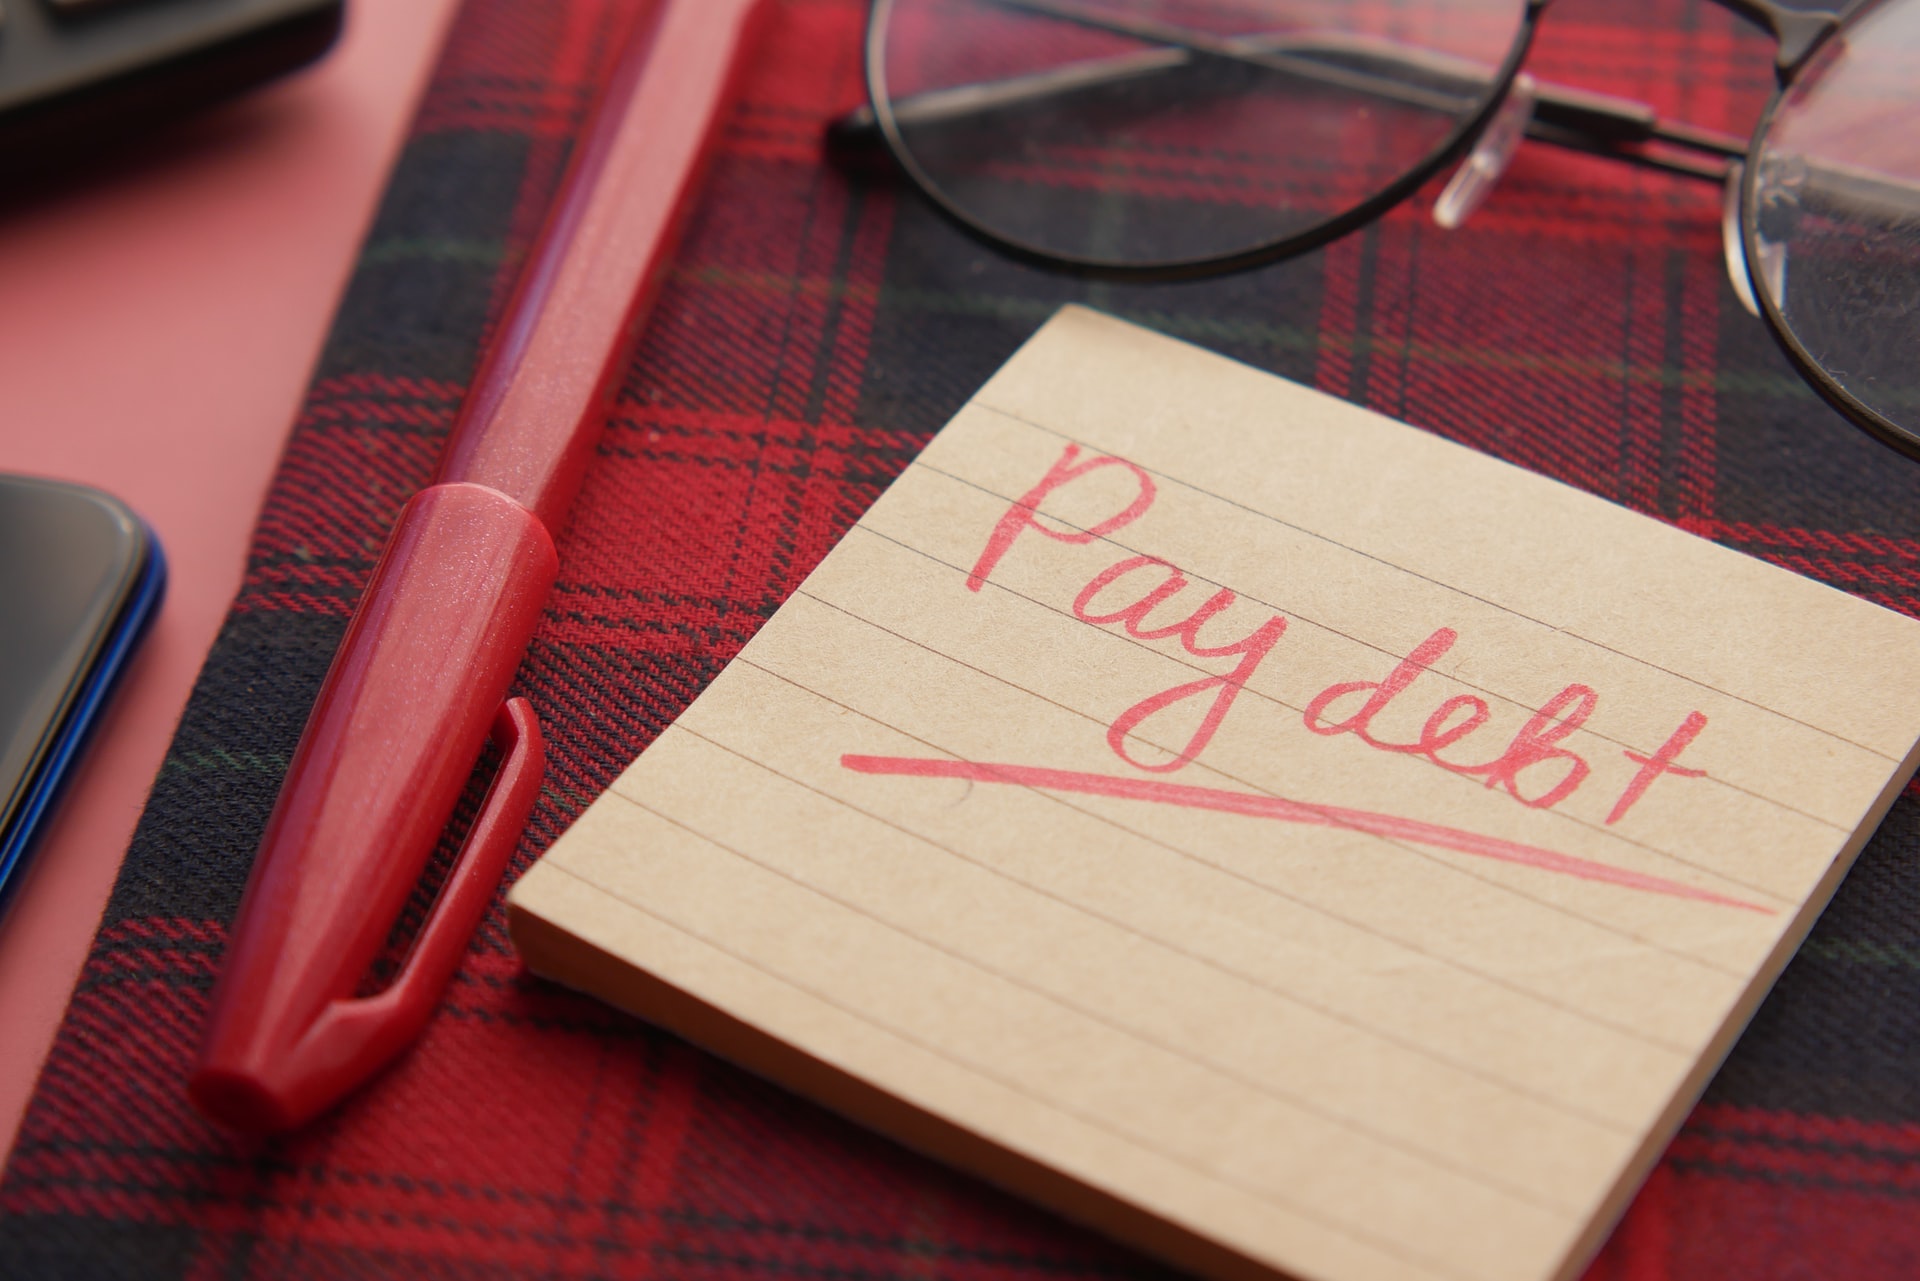 Pay debt written on sticky note in red pen on top of red plaid notebook